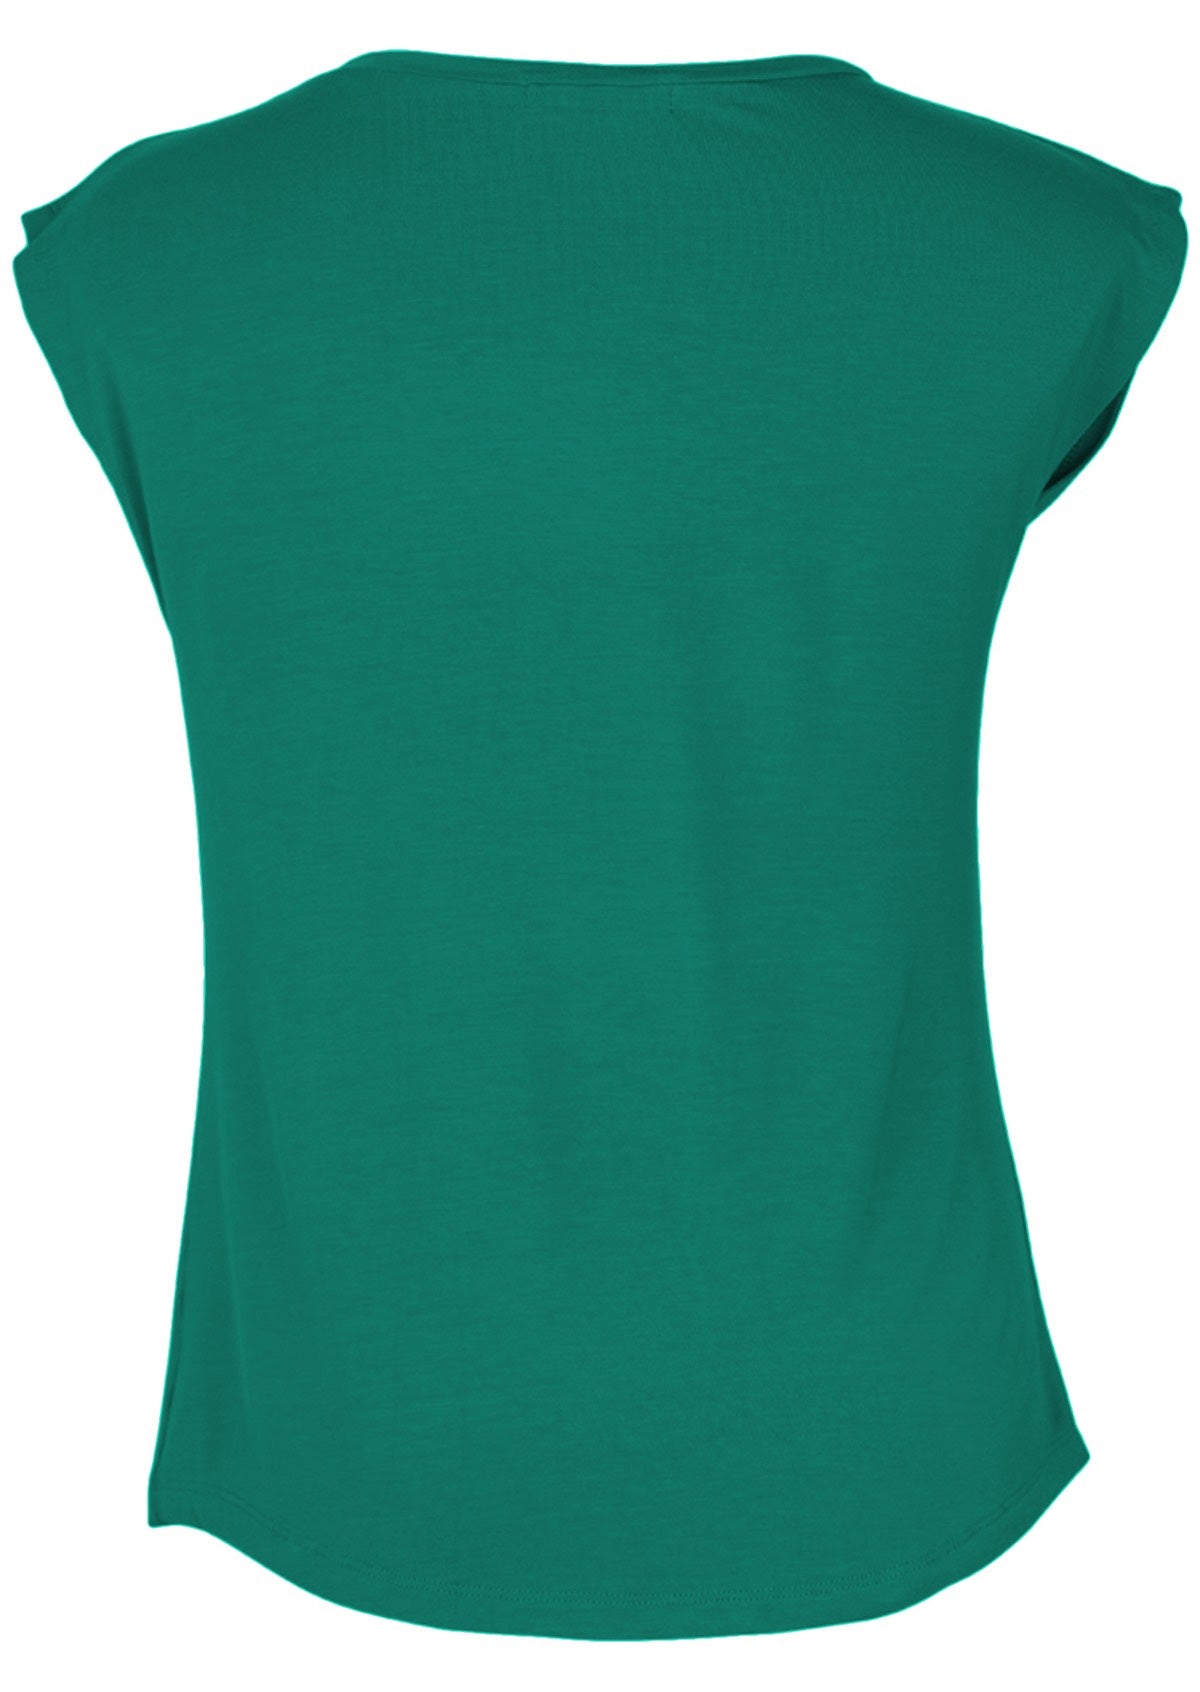 Back view of a short sleeve green women's top